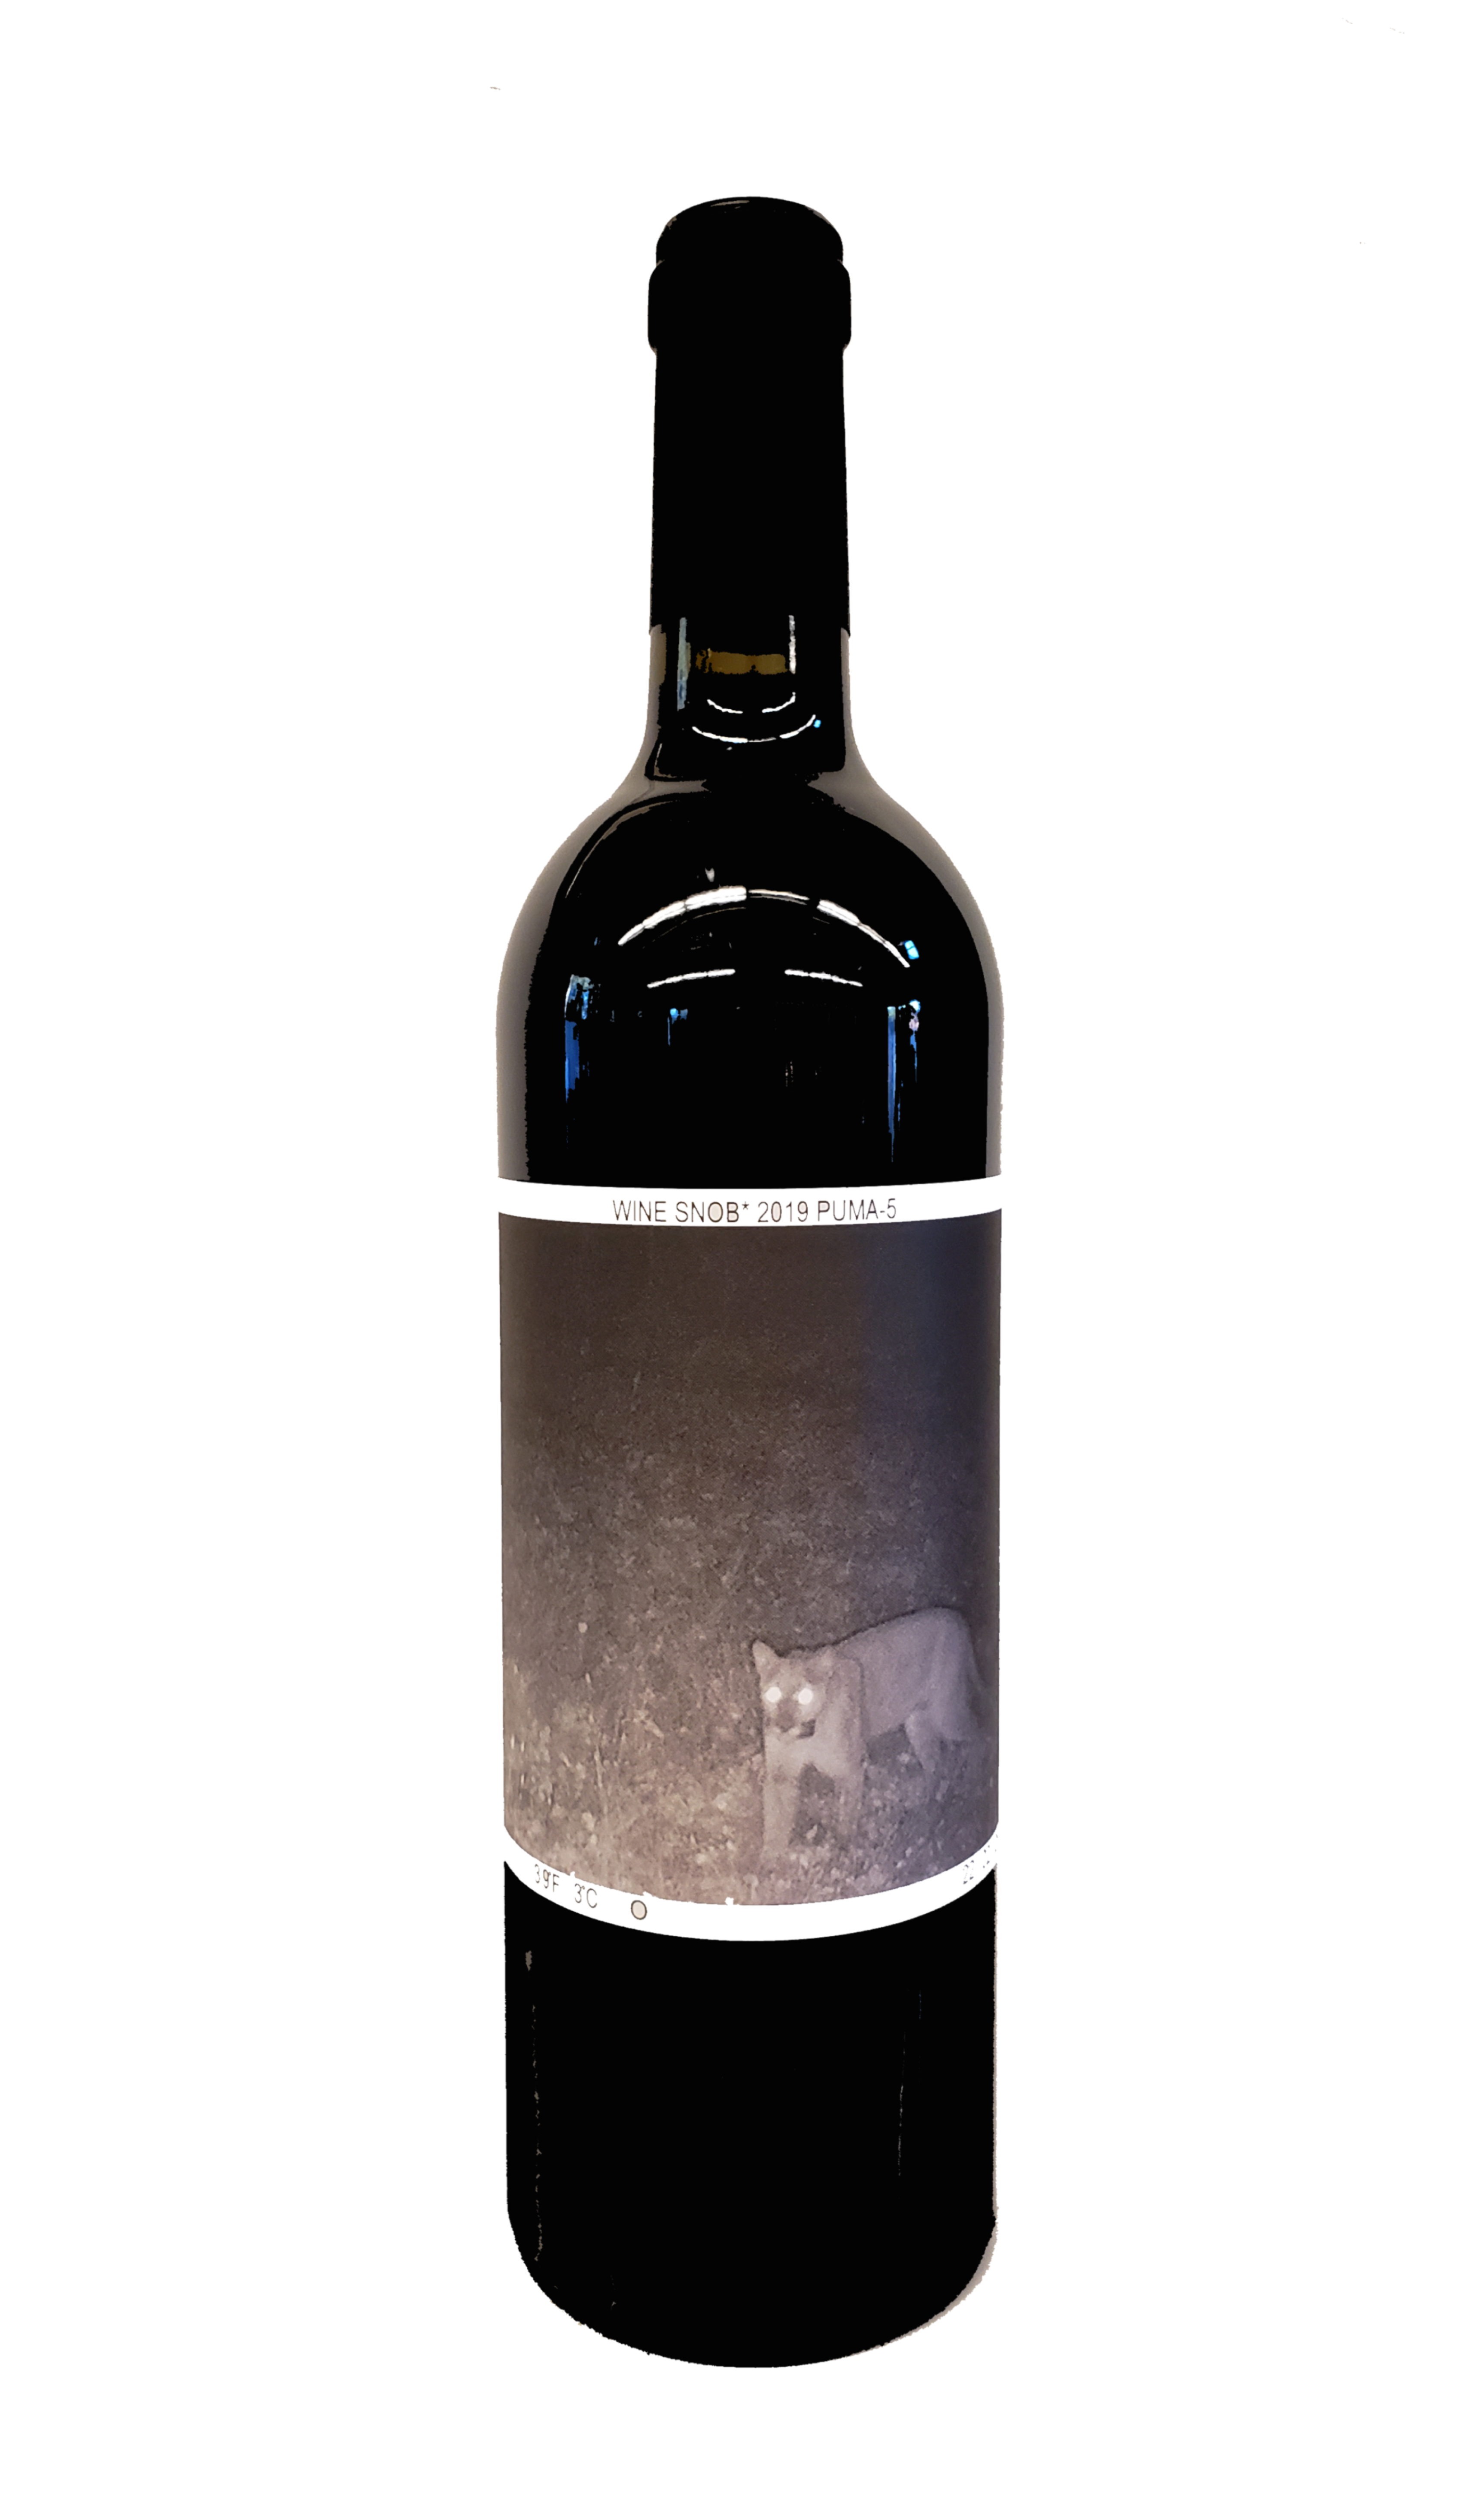 Bordeaux-style bottle with the Wine Snob* 2019 Puma-5 label showing a black-and-white photo of Puma-5, a mountain lion.